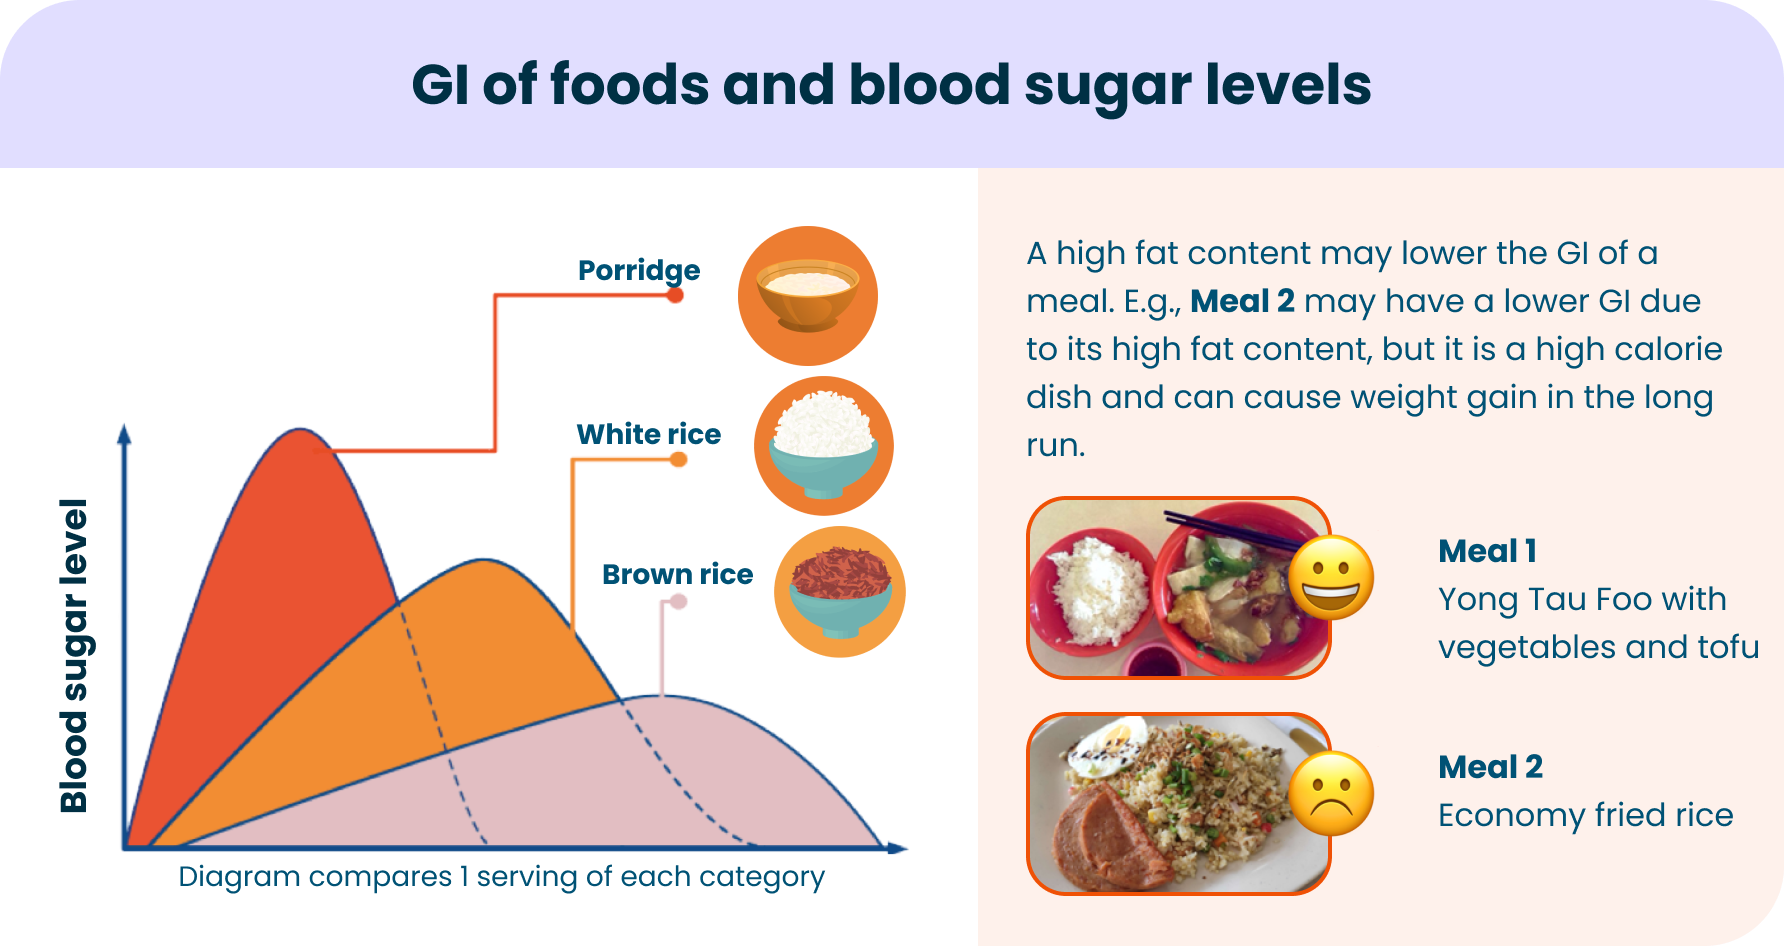 GI of foods and blood sugar levels